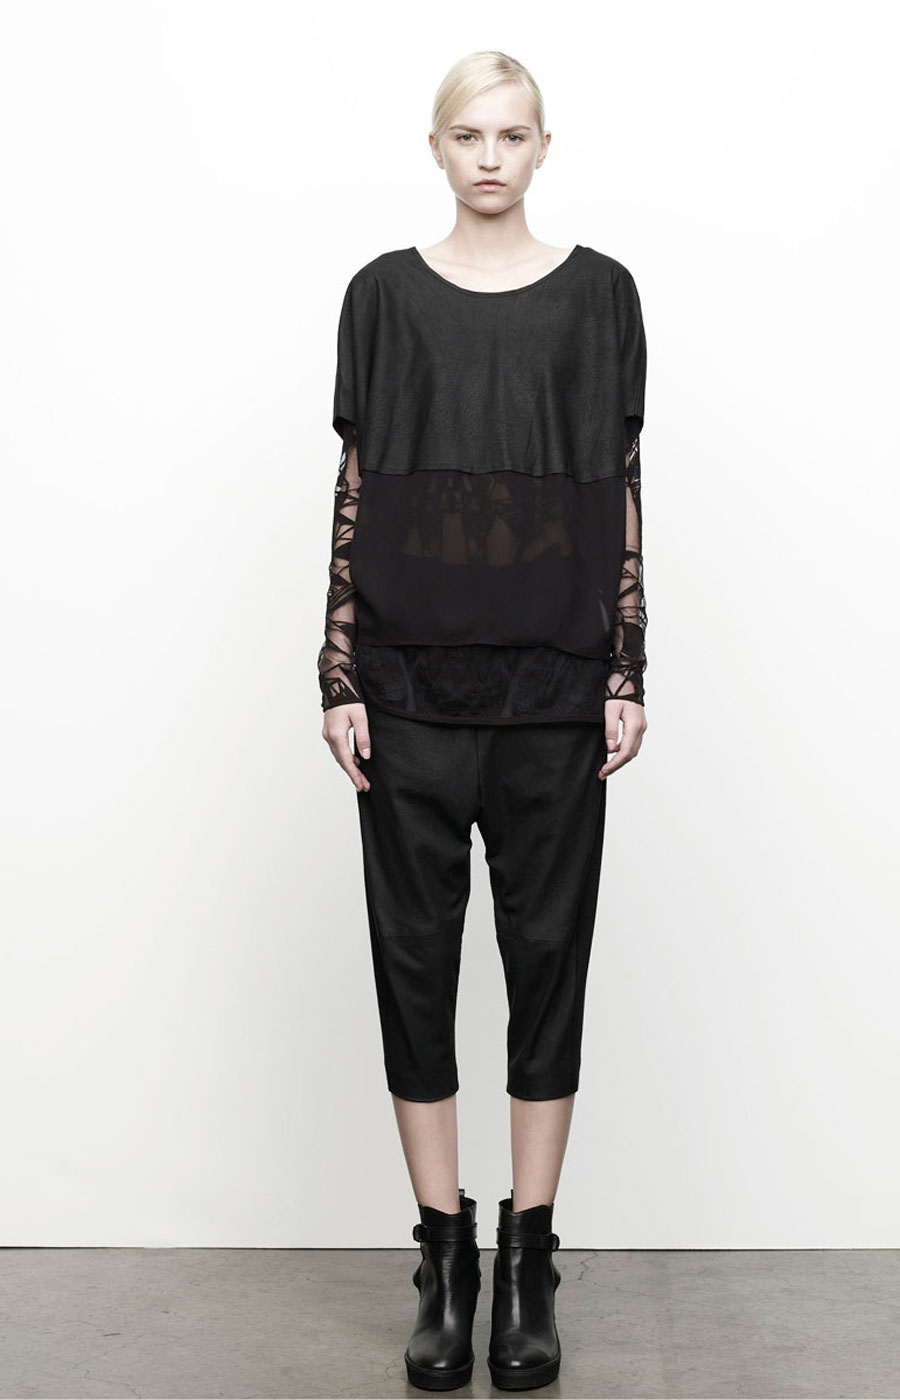 Pre-Fall 2012/2013 by Helmut Lang (3)